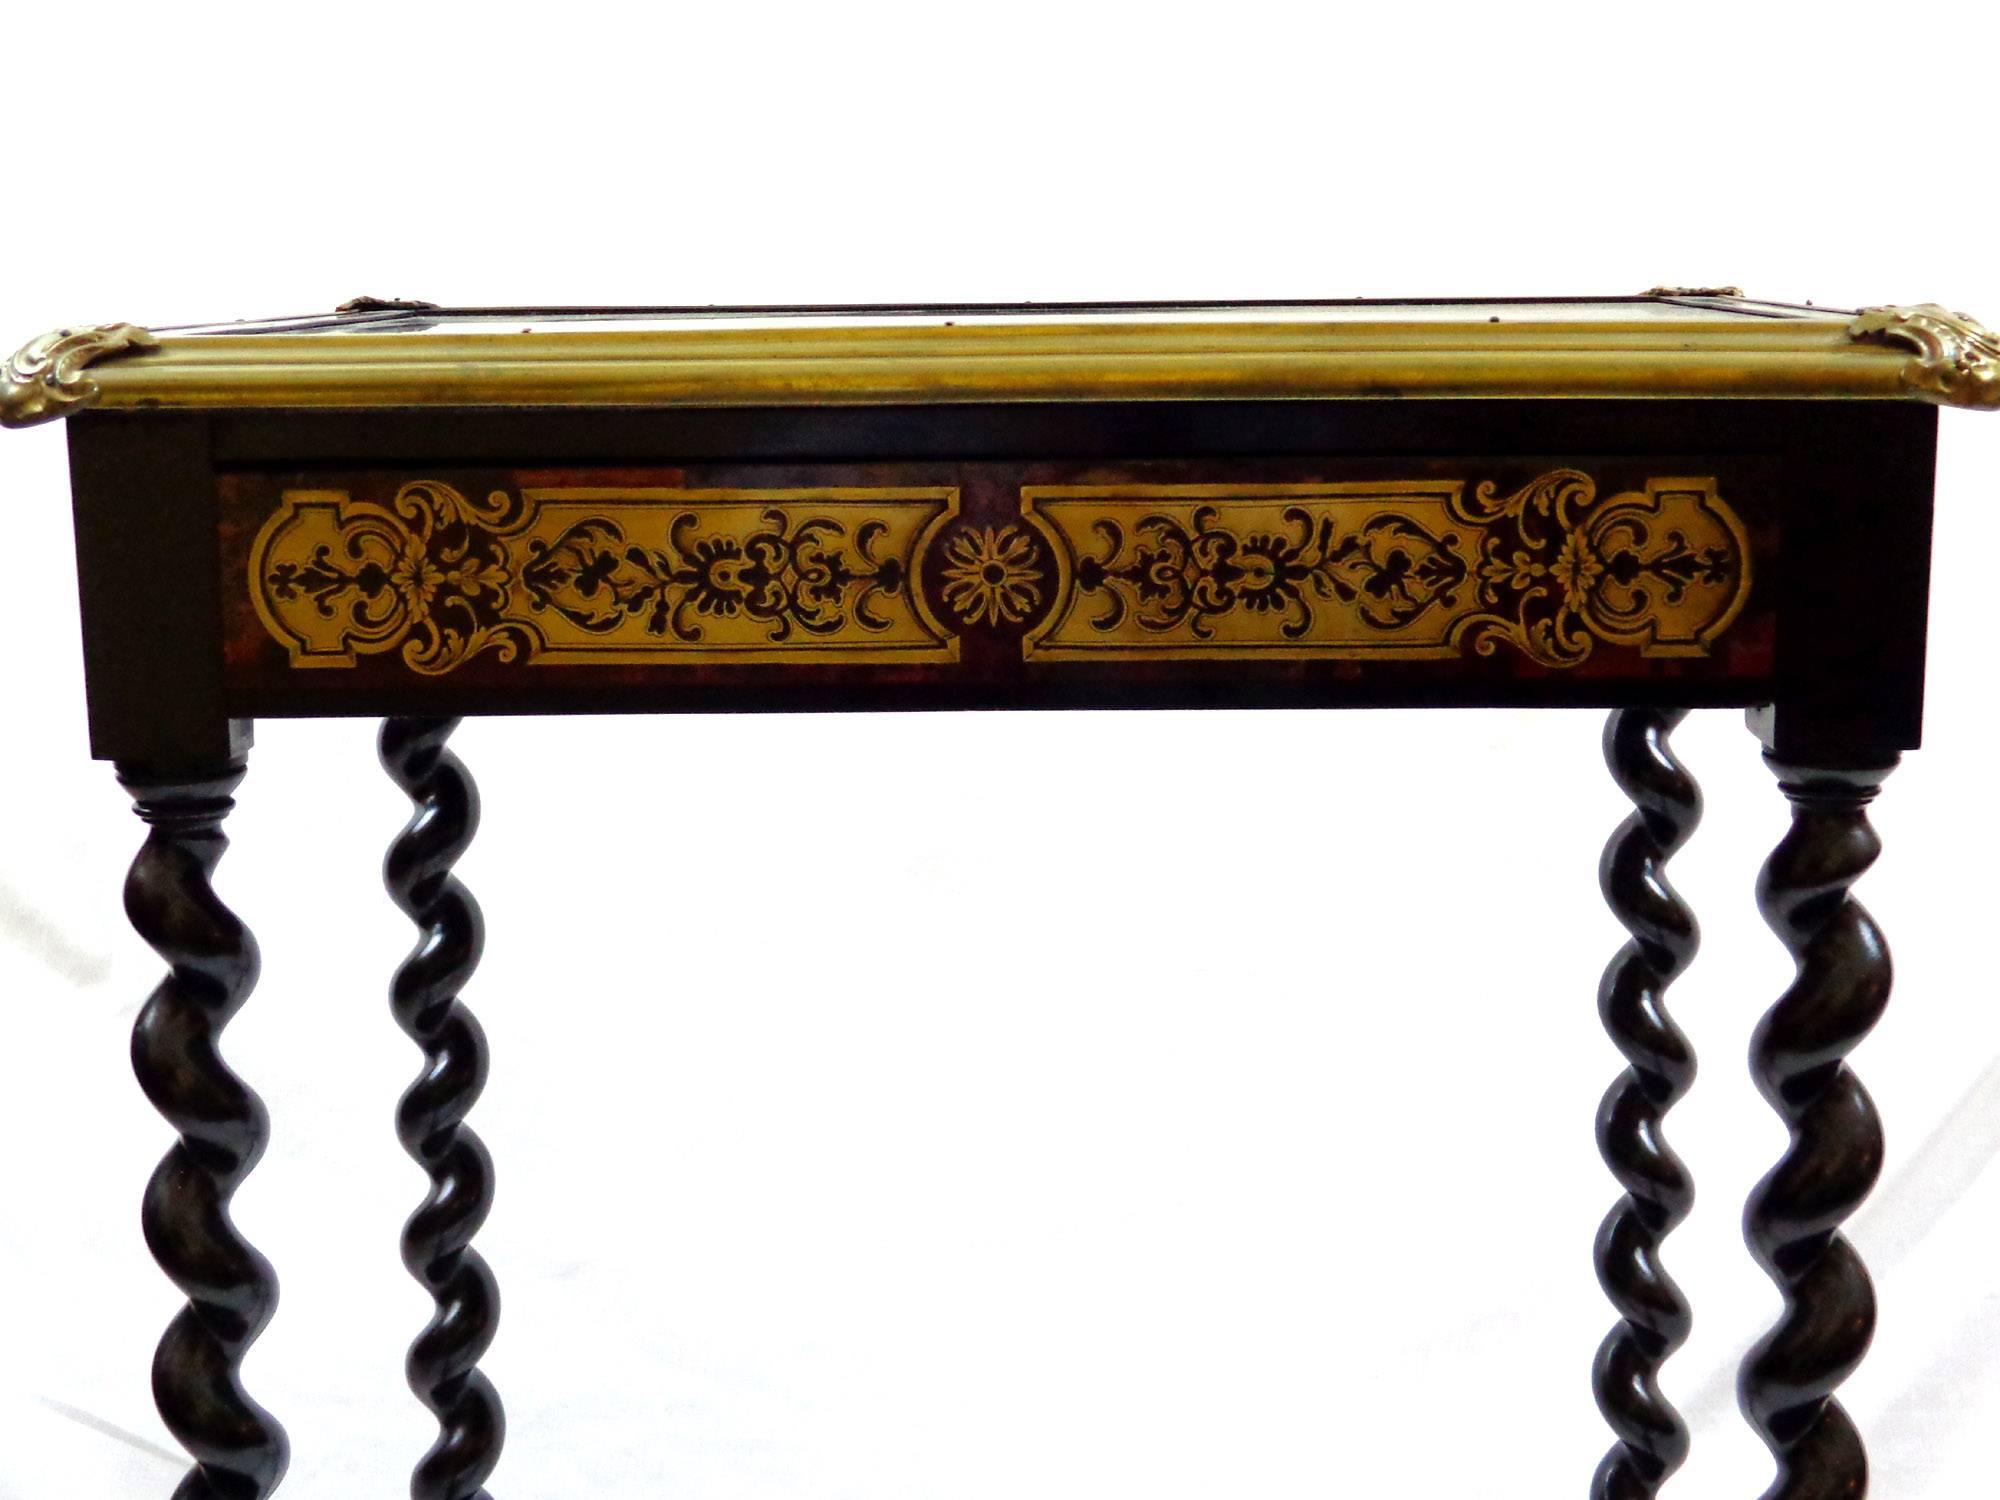 Ebonized side table with a single drawer, barley twist legs, panels with gilt decoration, and a glass top framed with bronze doré, in the style of André-Charles Boulle (1642-1732).